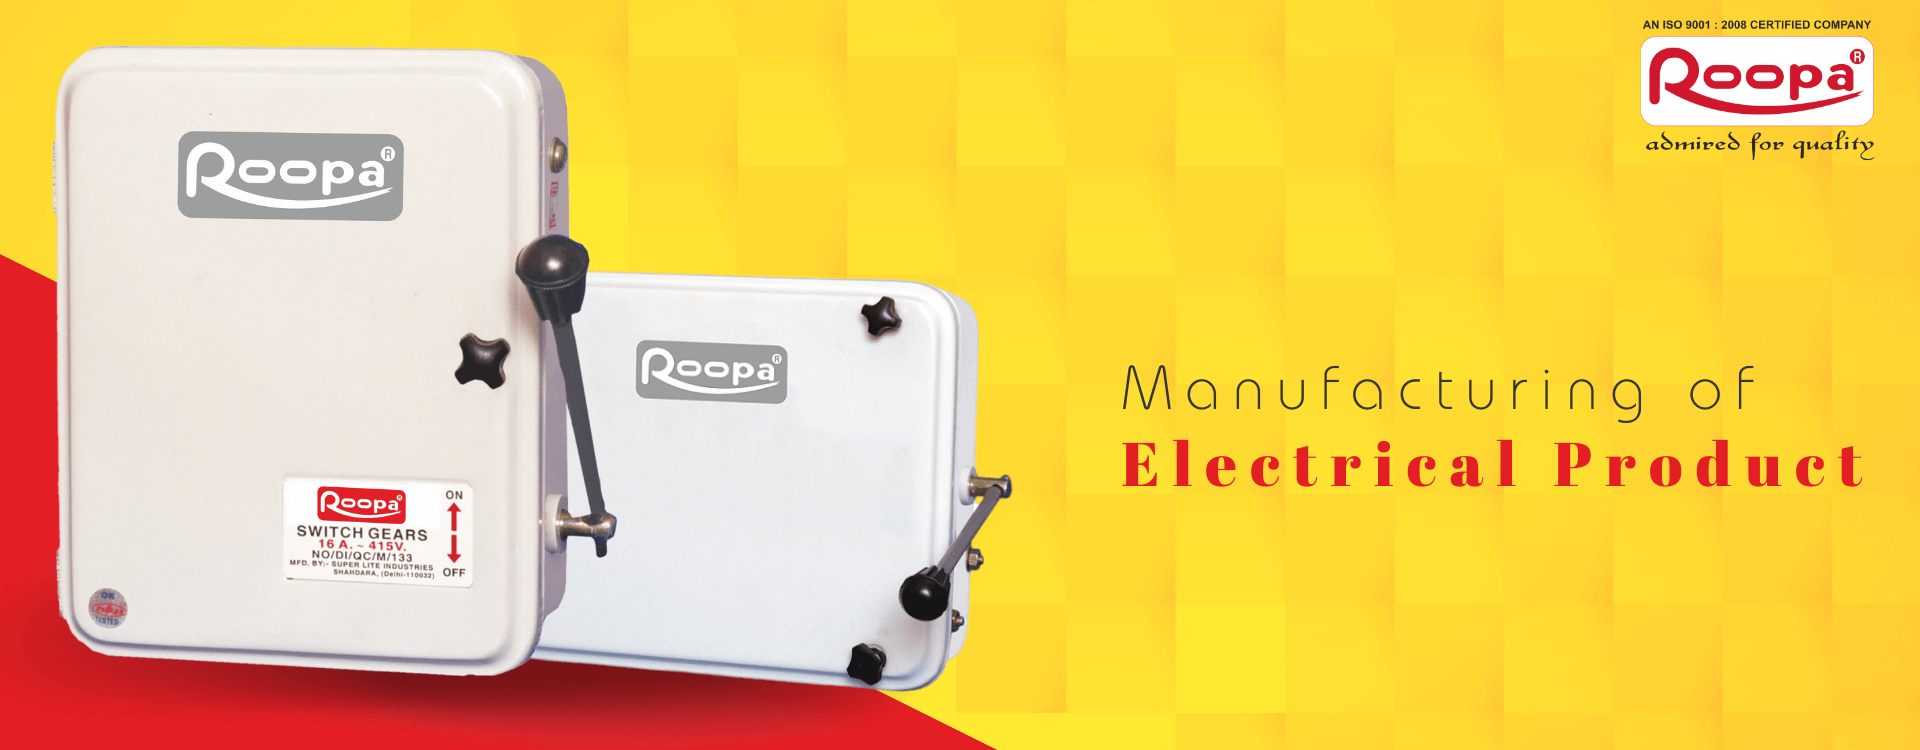 roopaelectrical